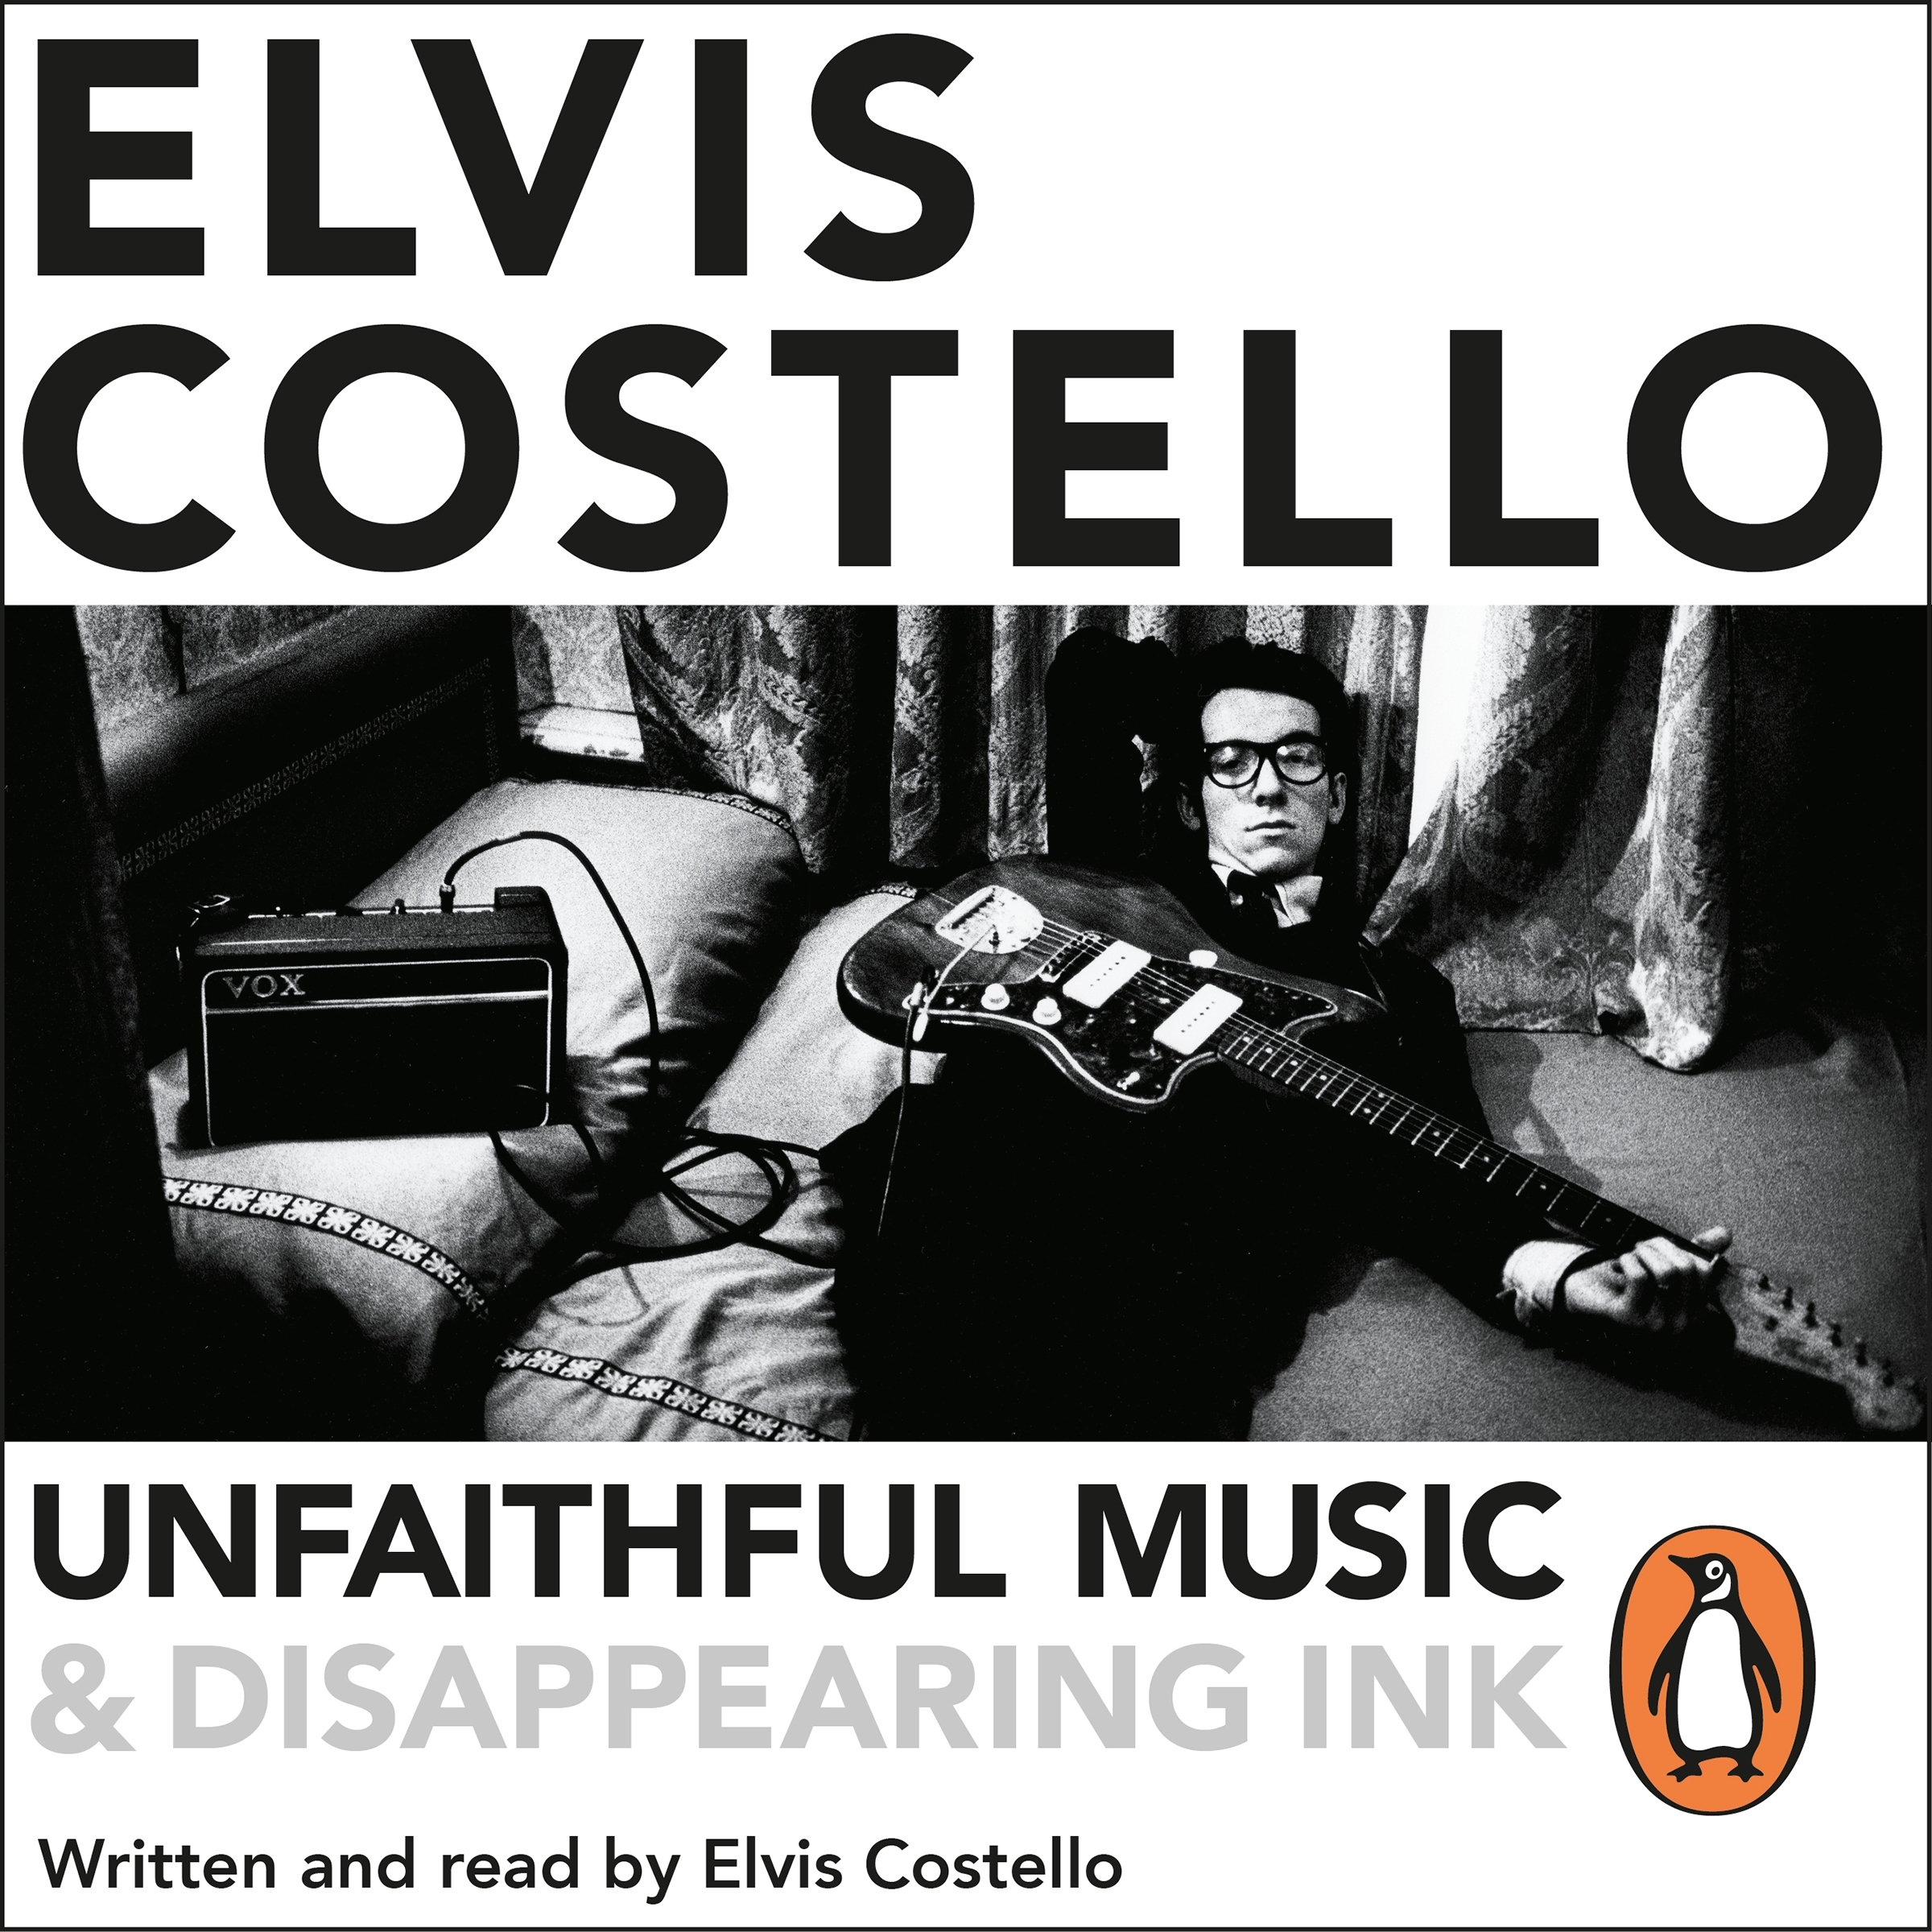 Elvis Costello 1994 - brutal Youth. Costello profile Cover. Music staff writer Ink.